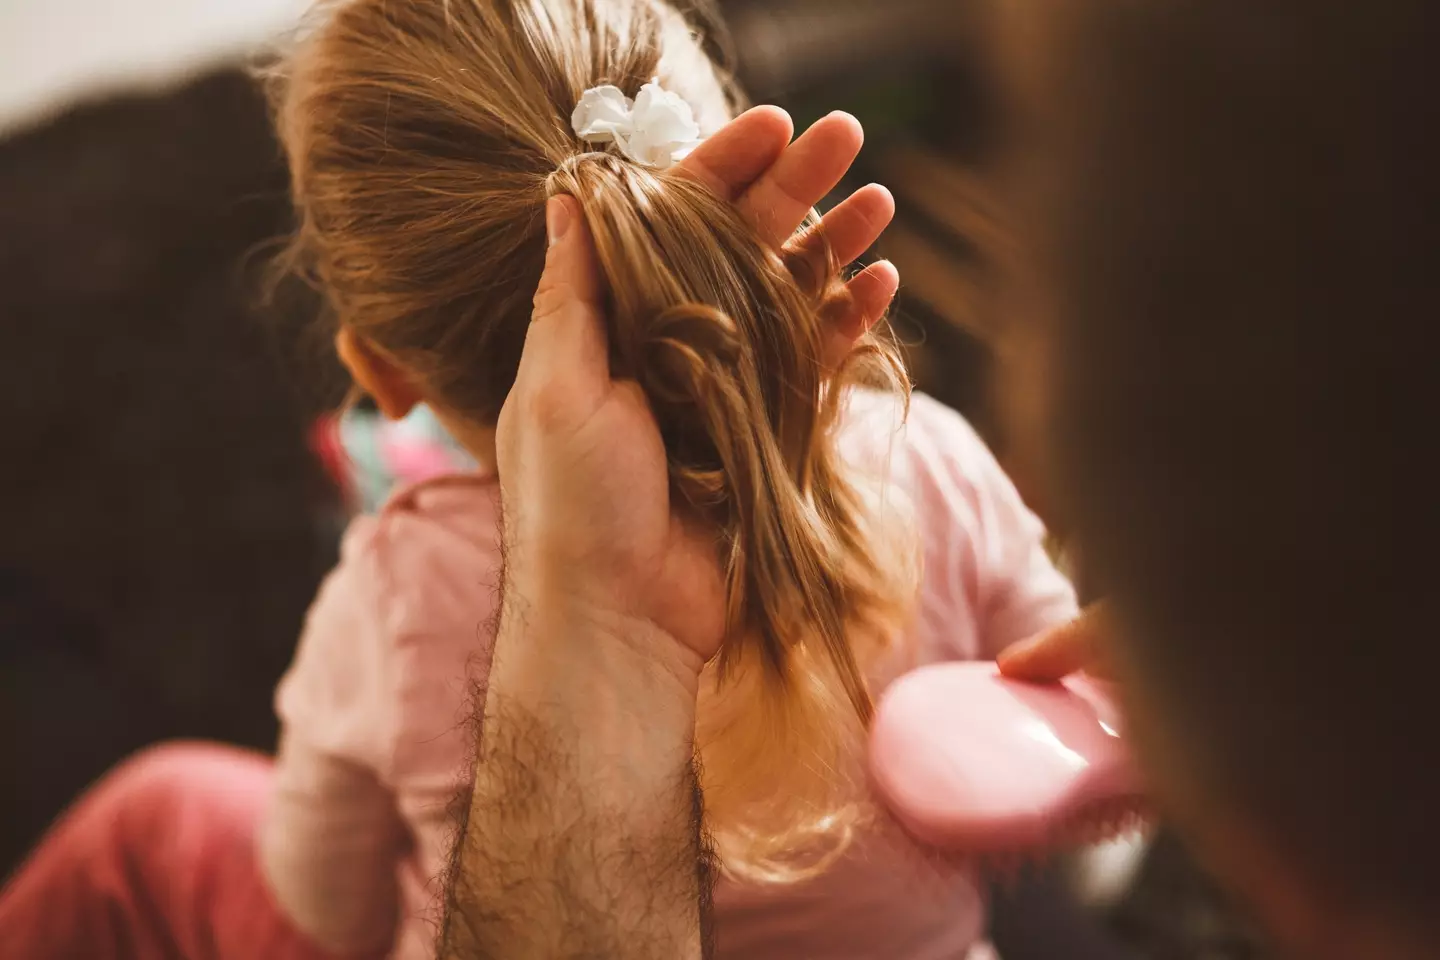 One mum has warned fellow parents of hair tourniquet syndrome.